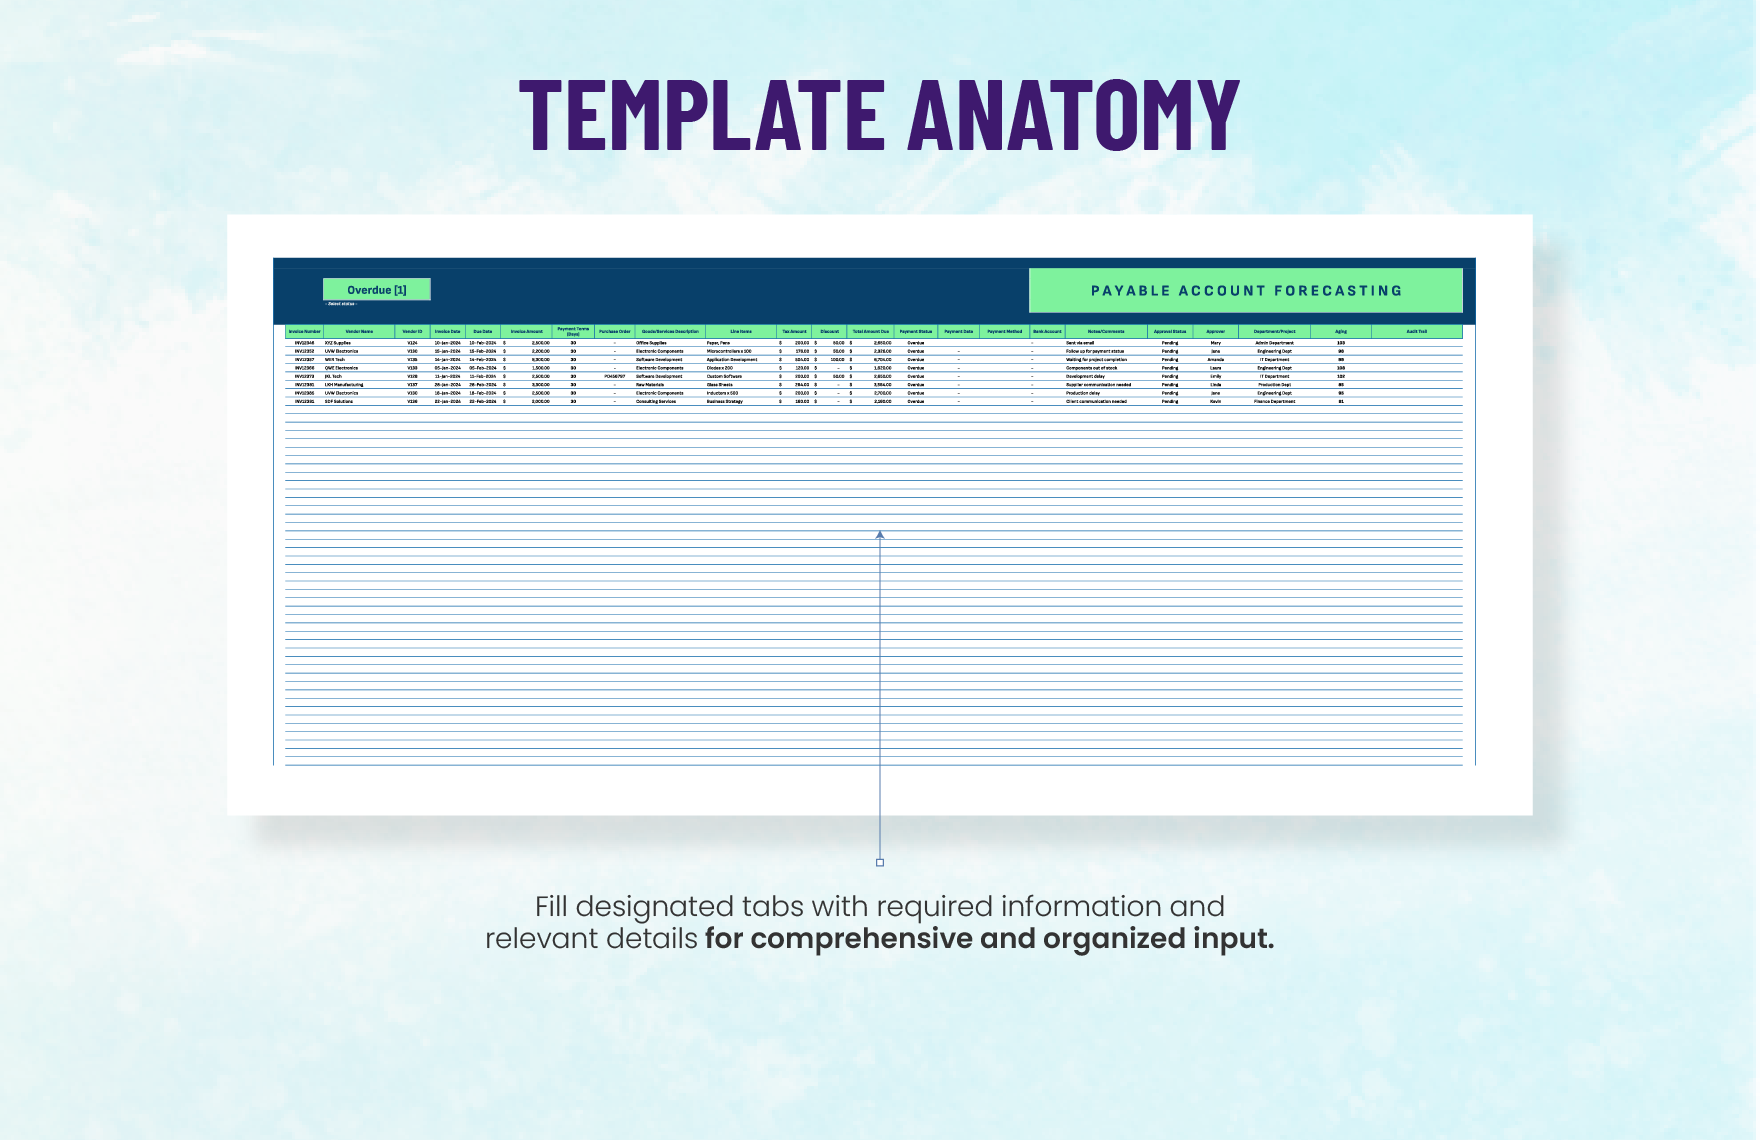 Payable Account Forecasting Template